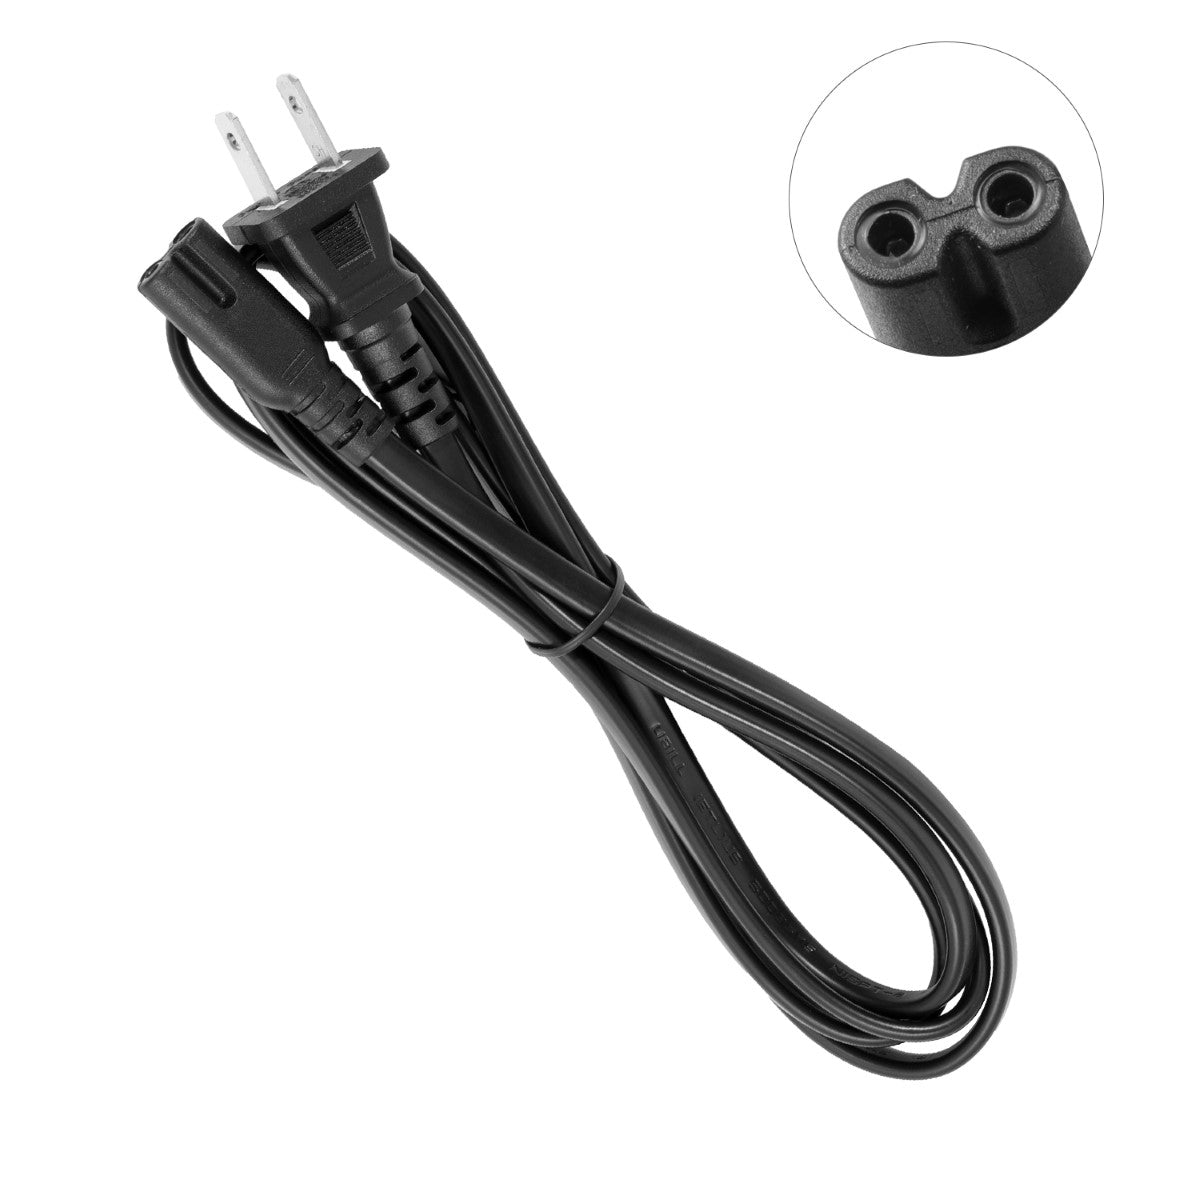 Power Cord for HP Officejet Pro 251dw Printer.